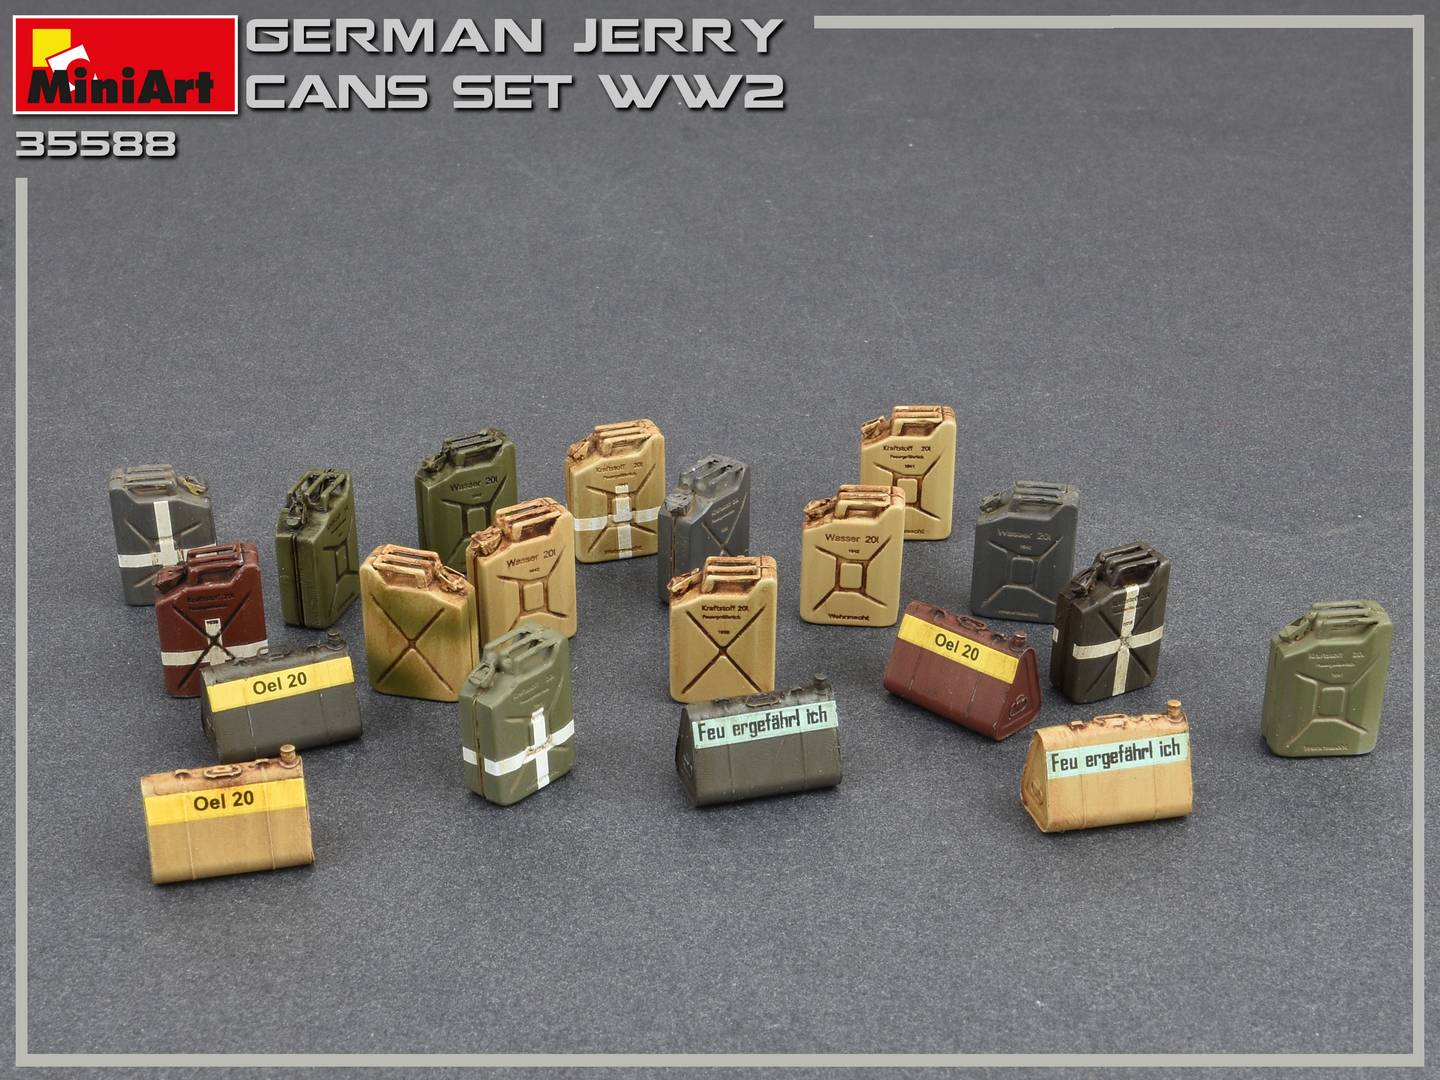 MiniArt 35588 1:35 WWII German Jerry Cans Plastic Model Kit (Set of 24)